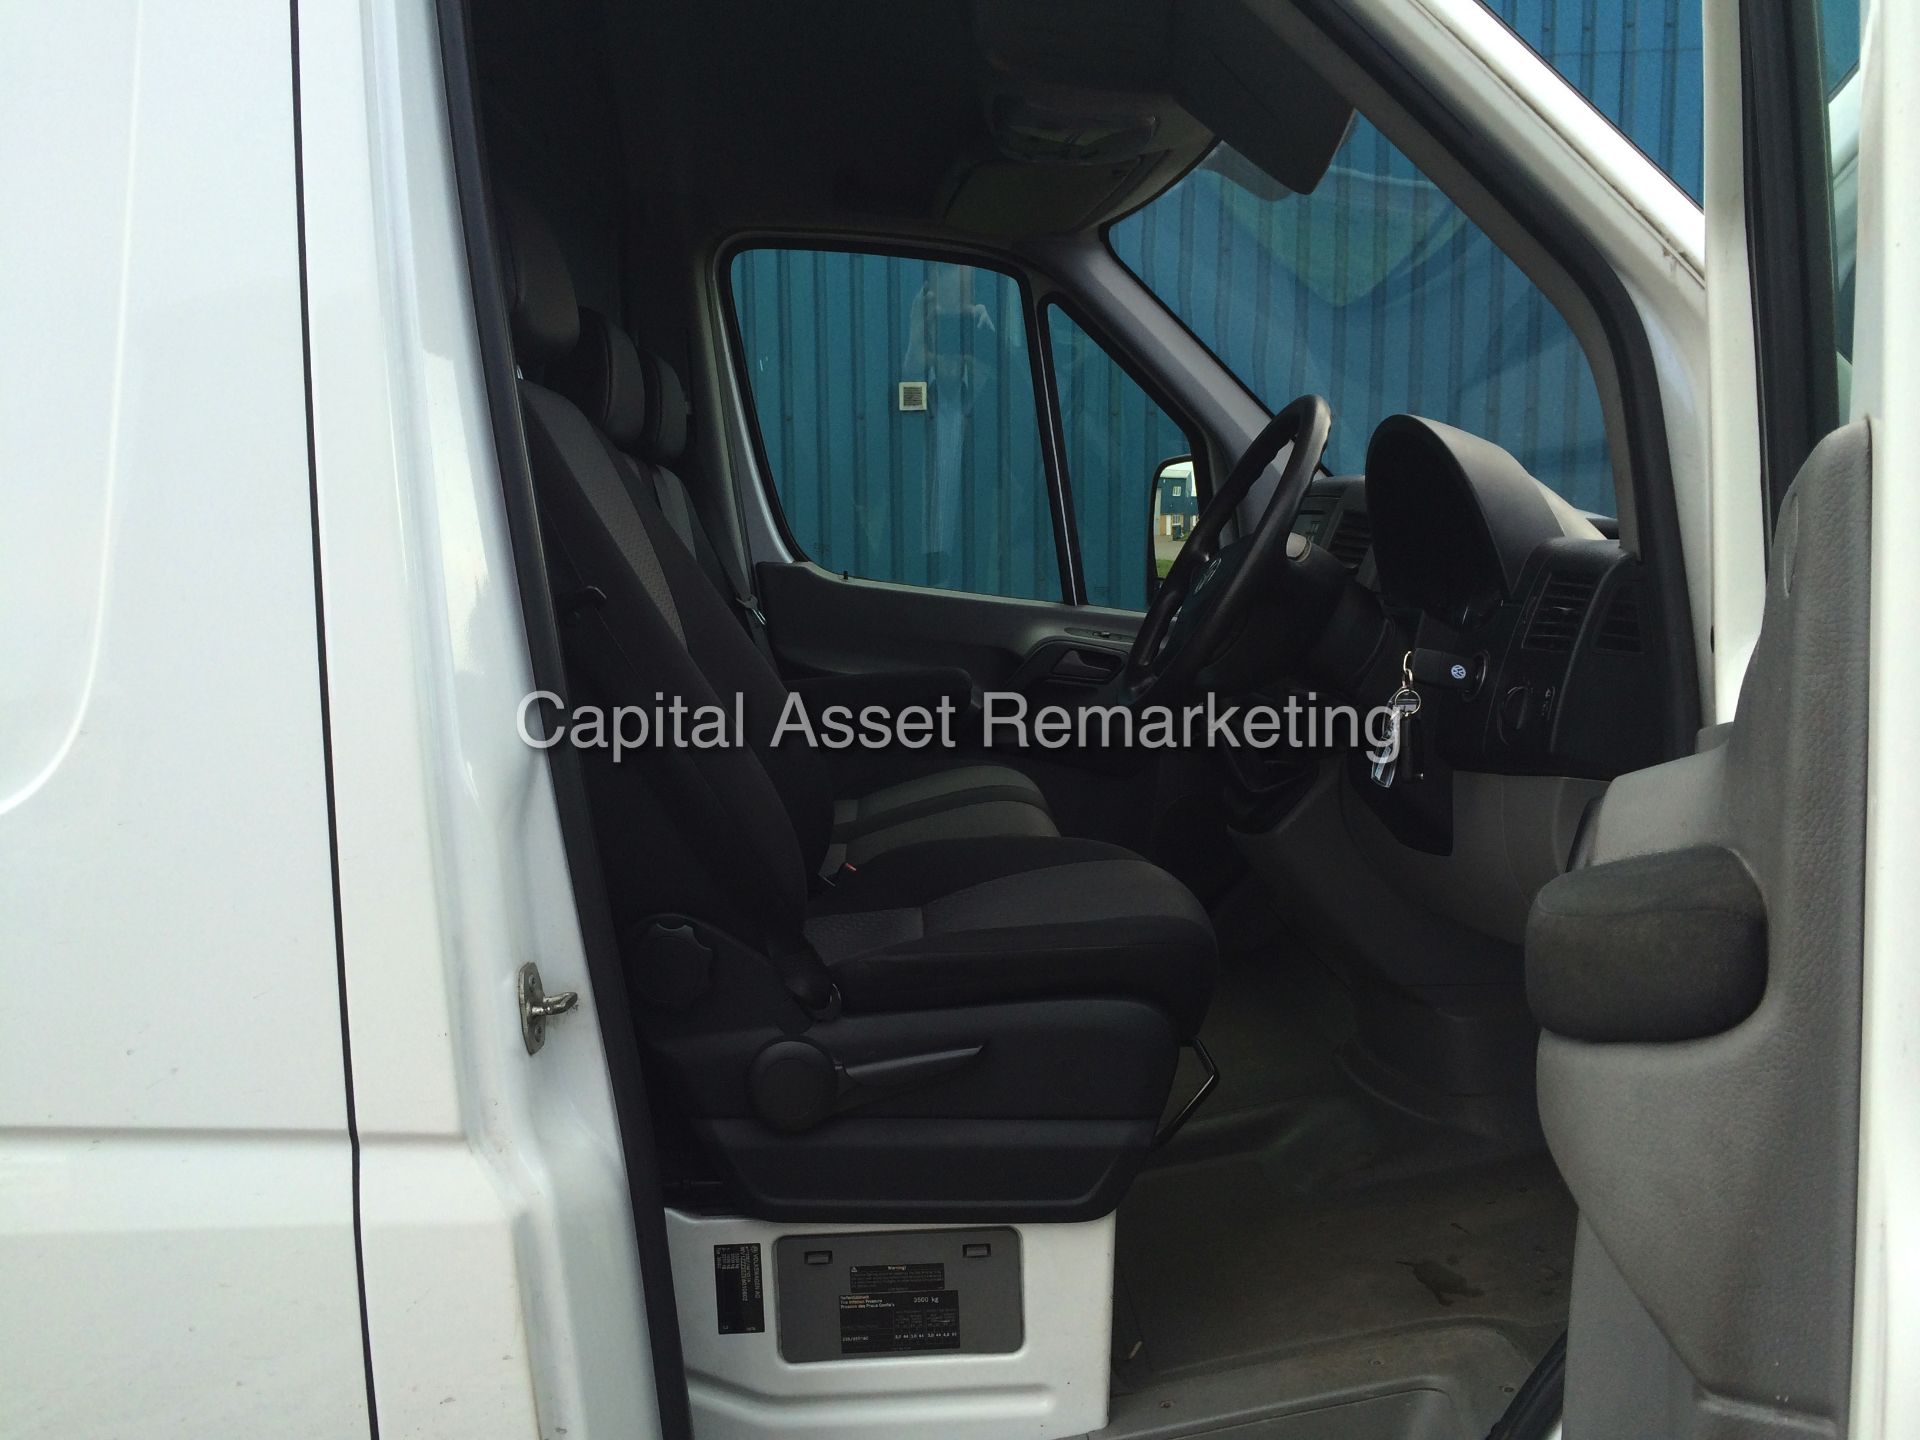 VOLKSWAGEN CRAFTER 2.0Ltr TDI CR35 LWB (2014 MODEL) NEW SHAPE - CRUISE CONTROL - 1 OWNER FROM NEW !! - Image 9 of 19